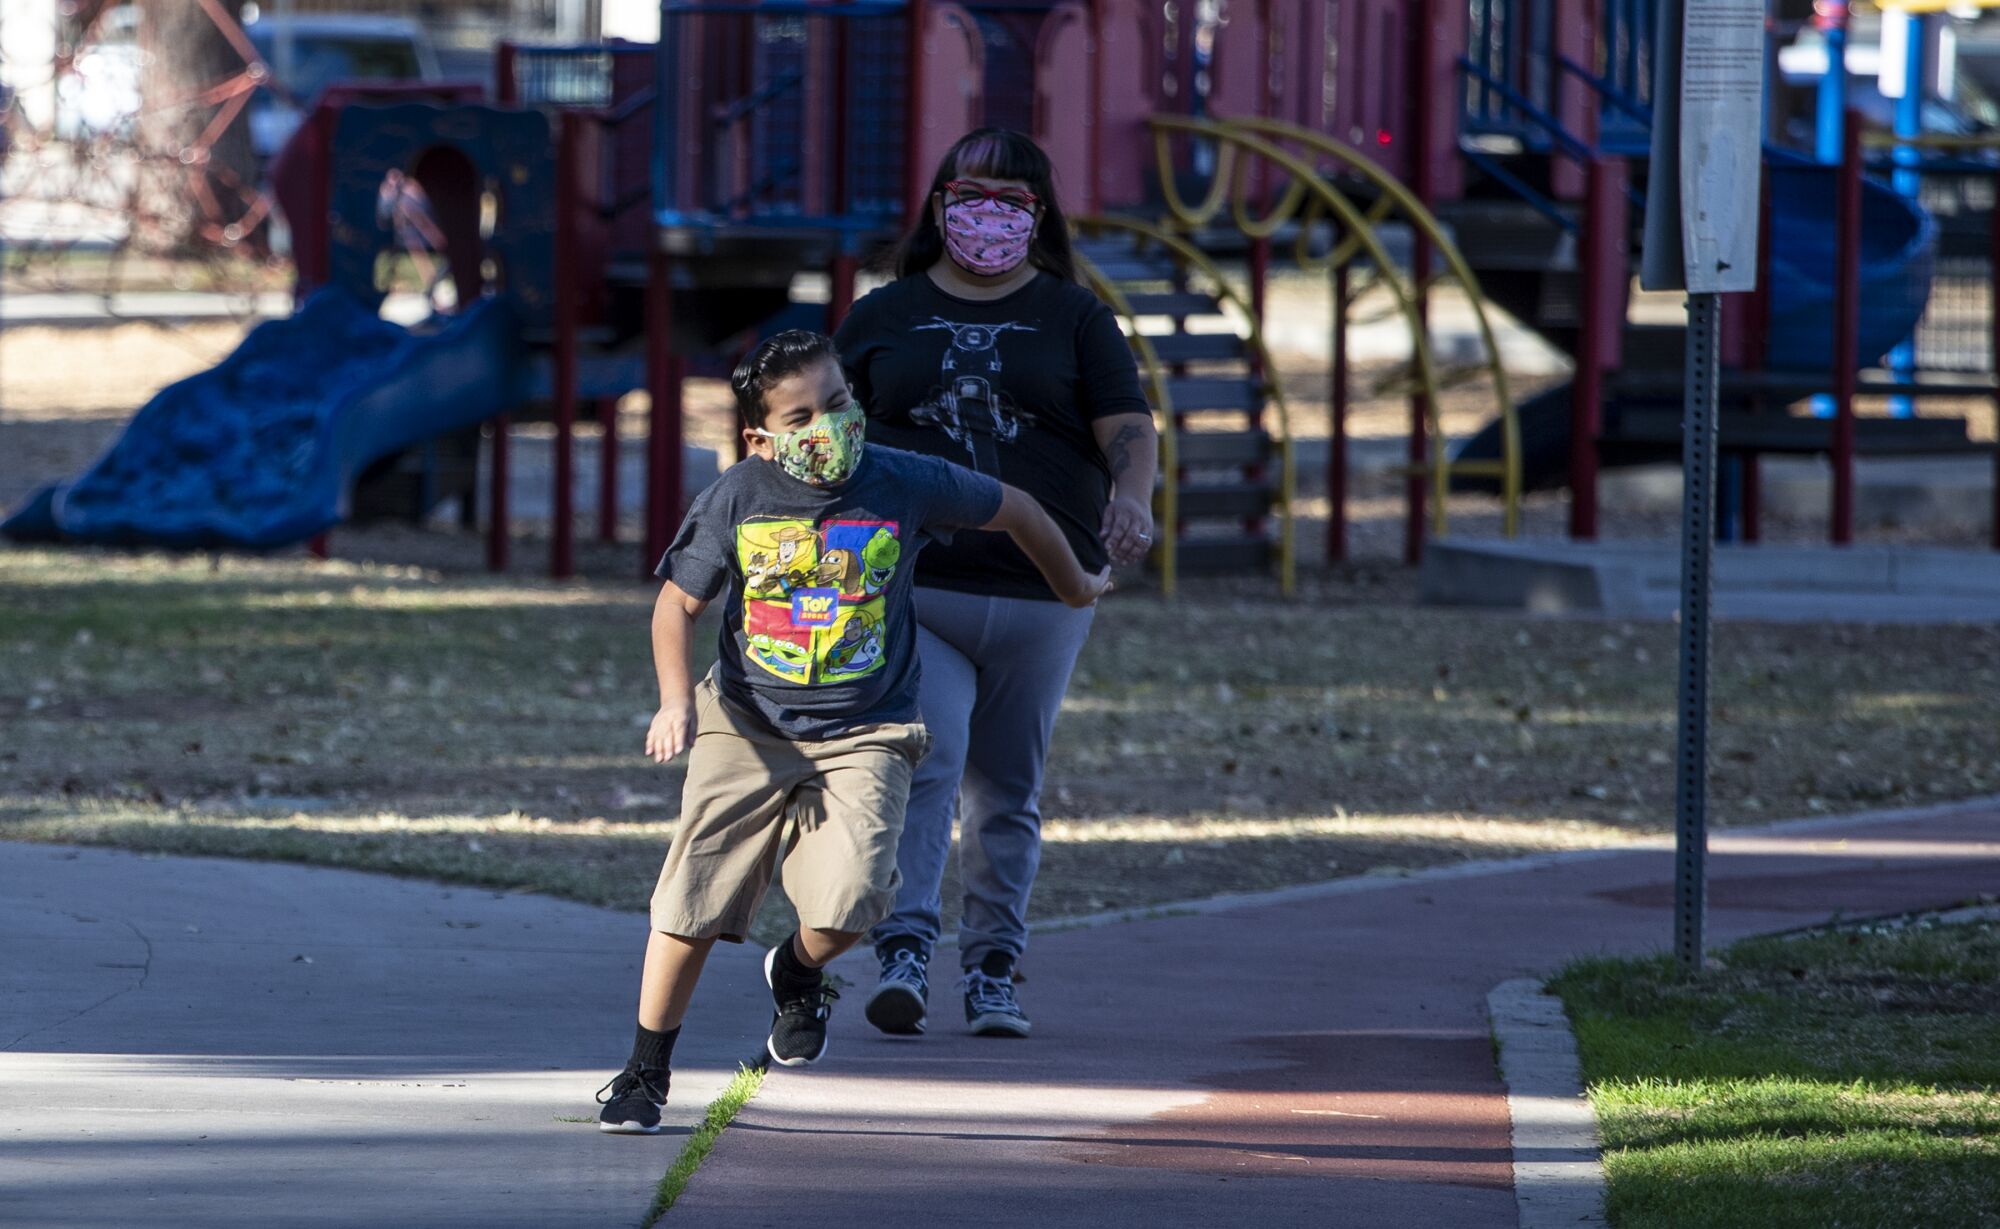 Paloma Yanez and her son, Benny Jr., 7, spend time together in a park.